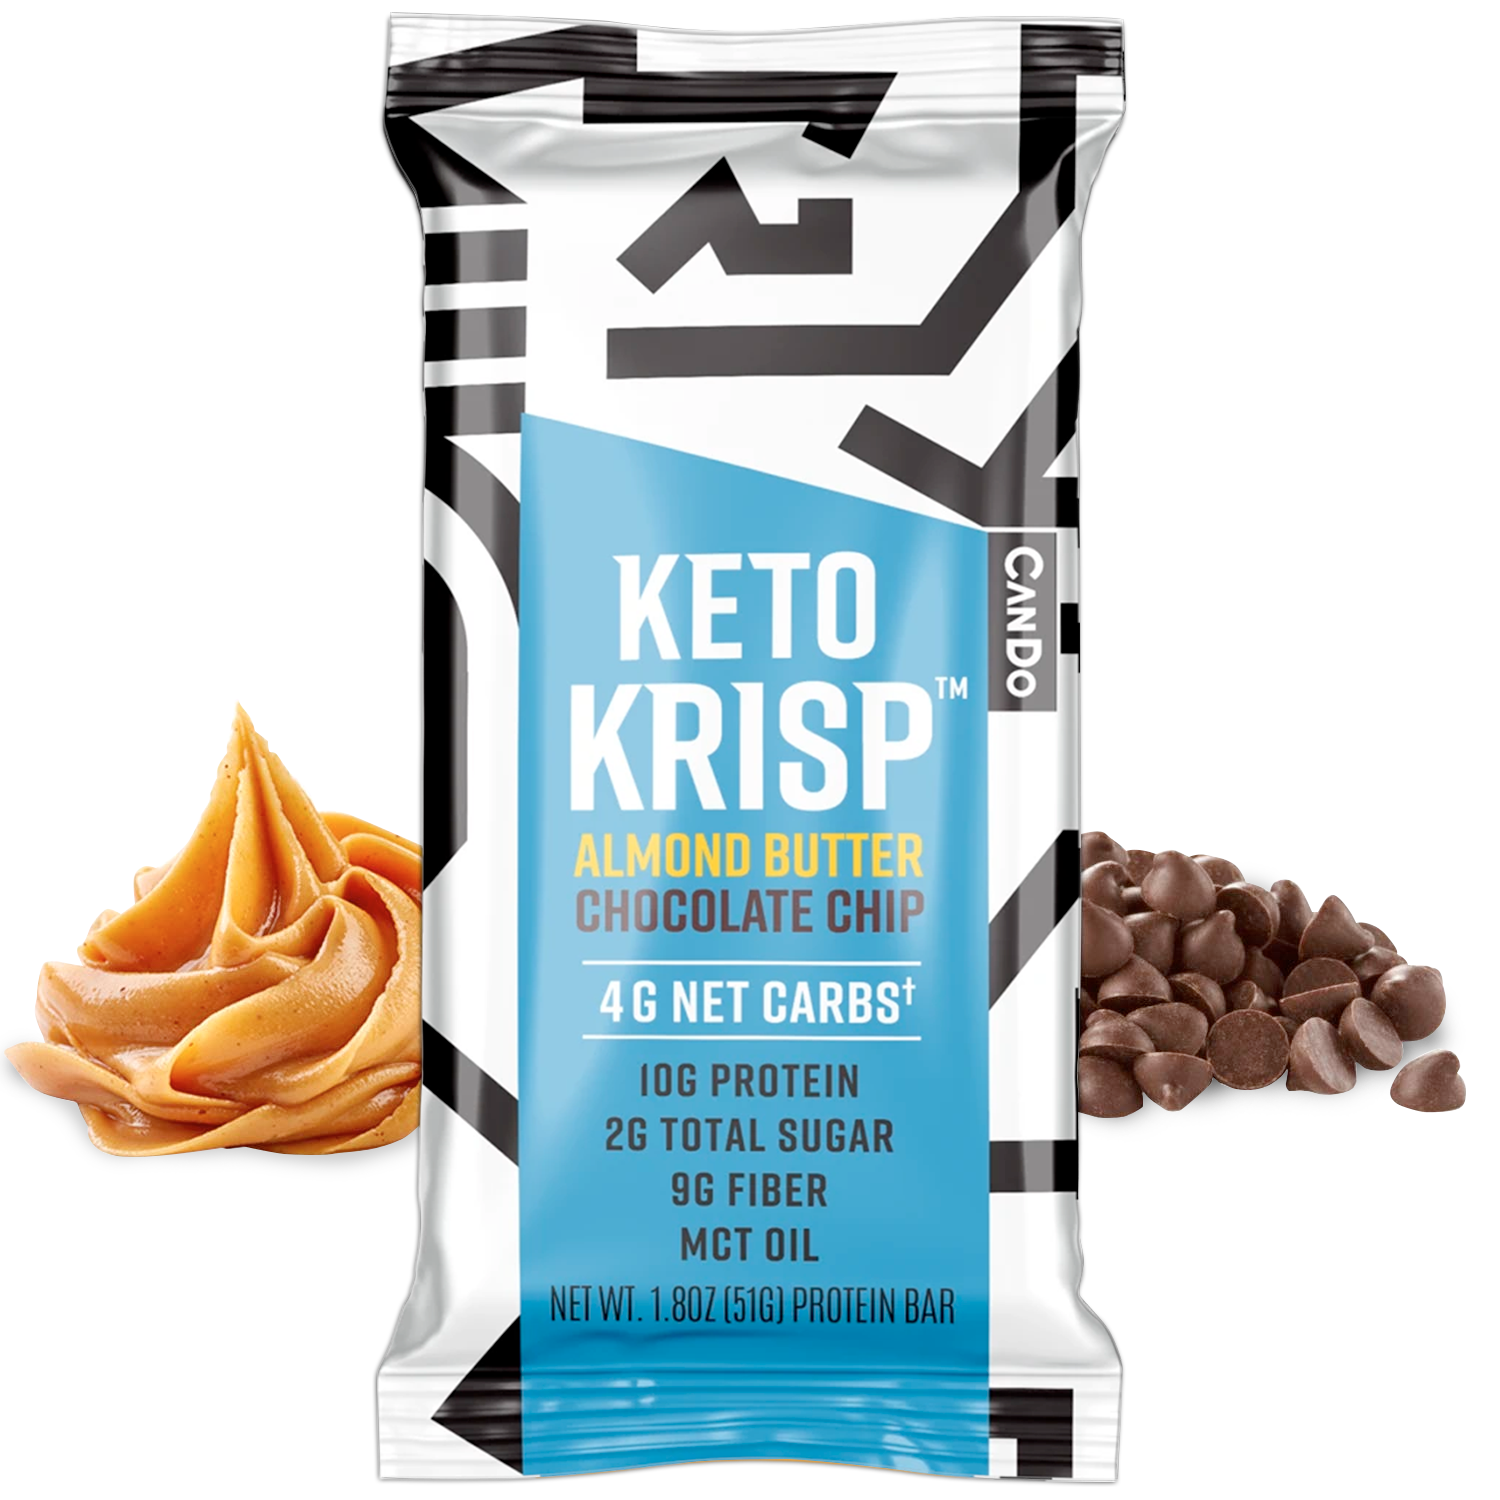 Keto Krisp Almond Butter Chocolate Chip (Pack of 12)